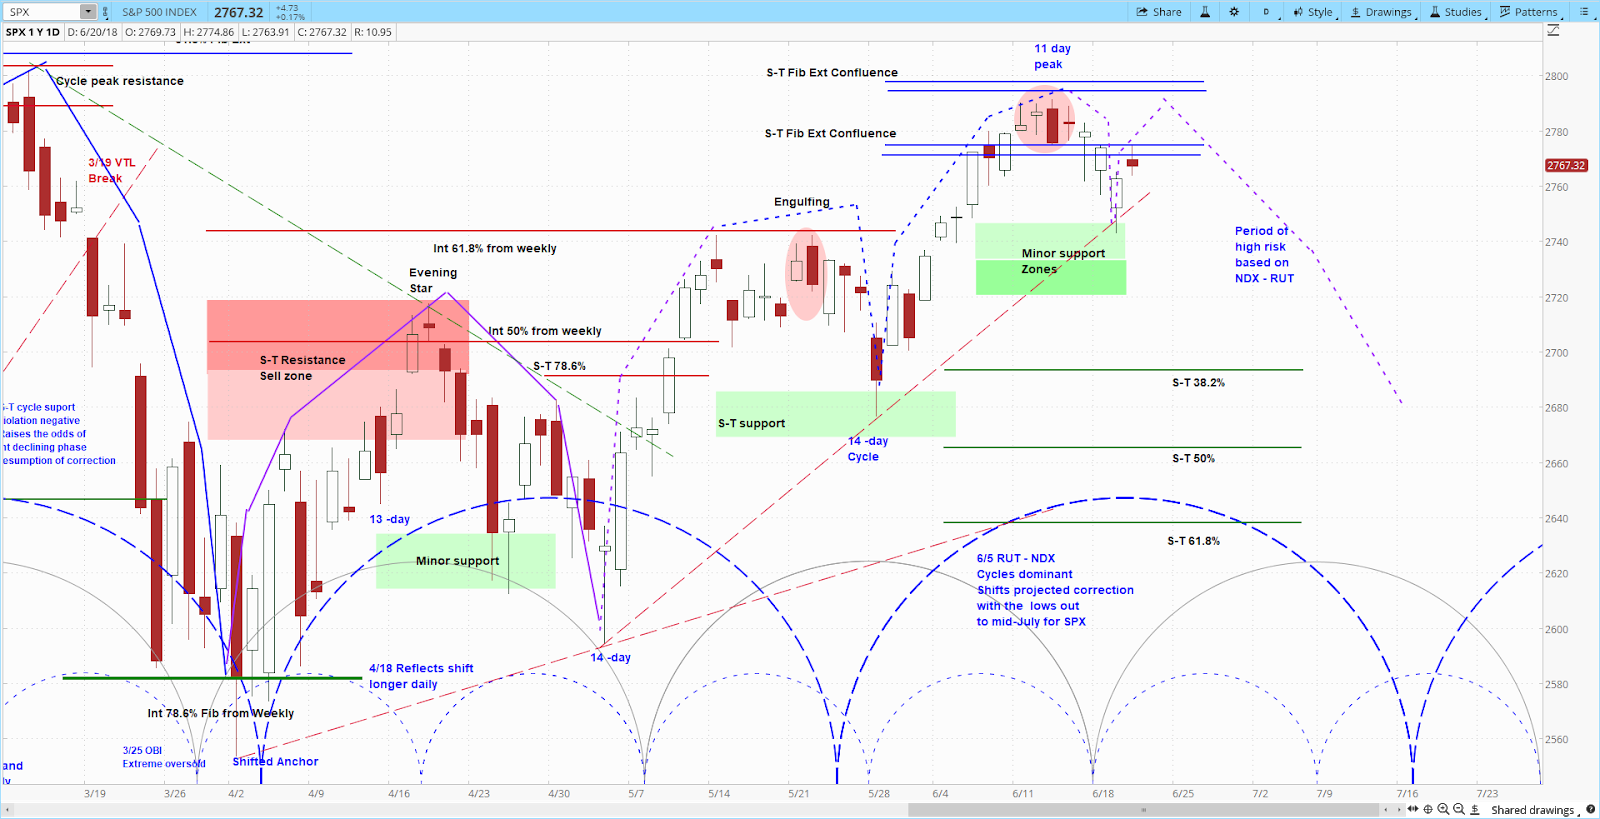 S&P 500 (SPX) Daily Chart from our Stock Index Report 